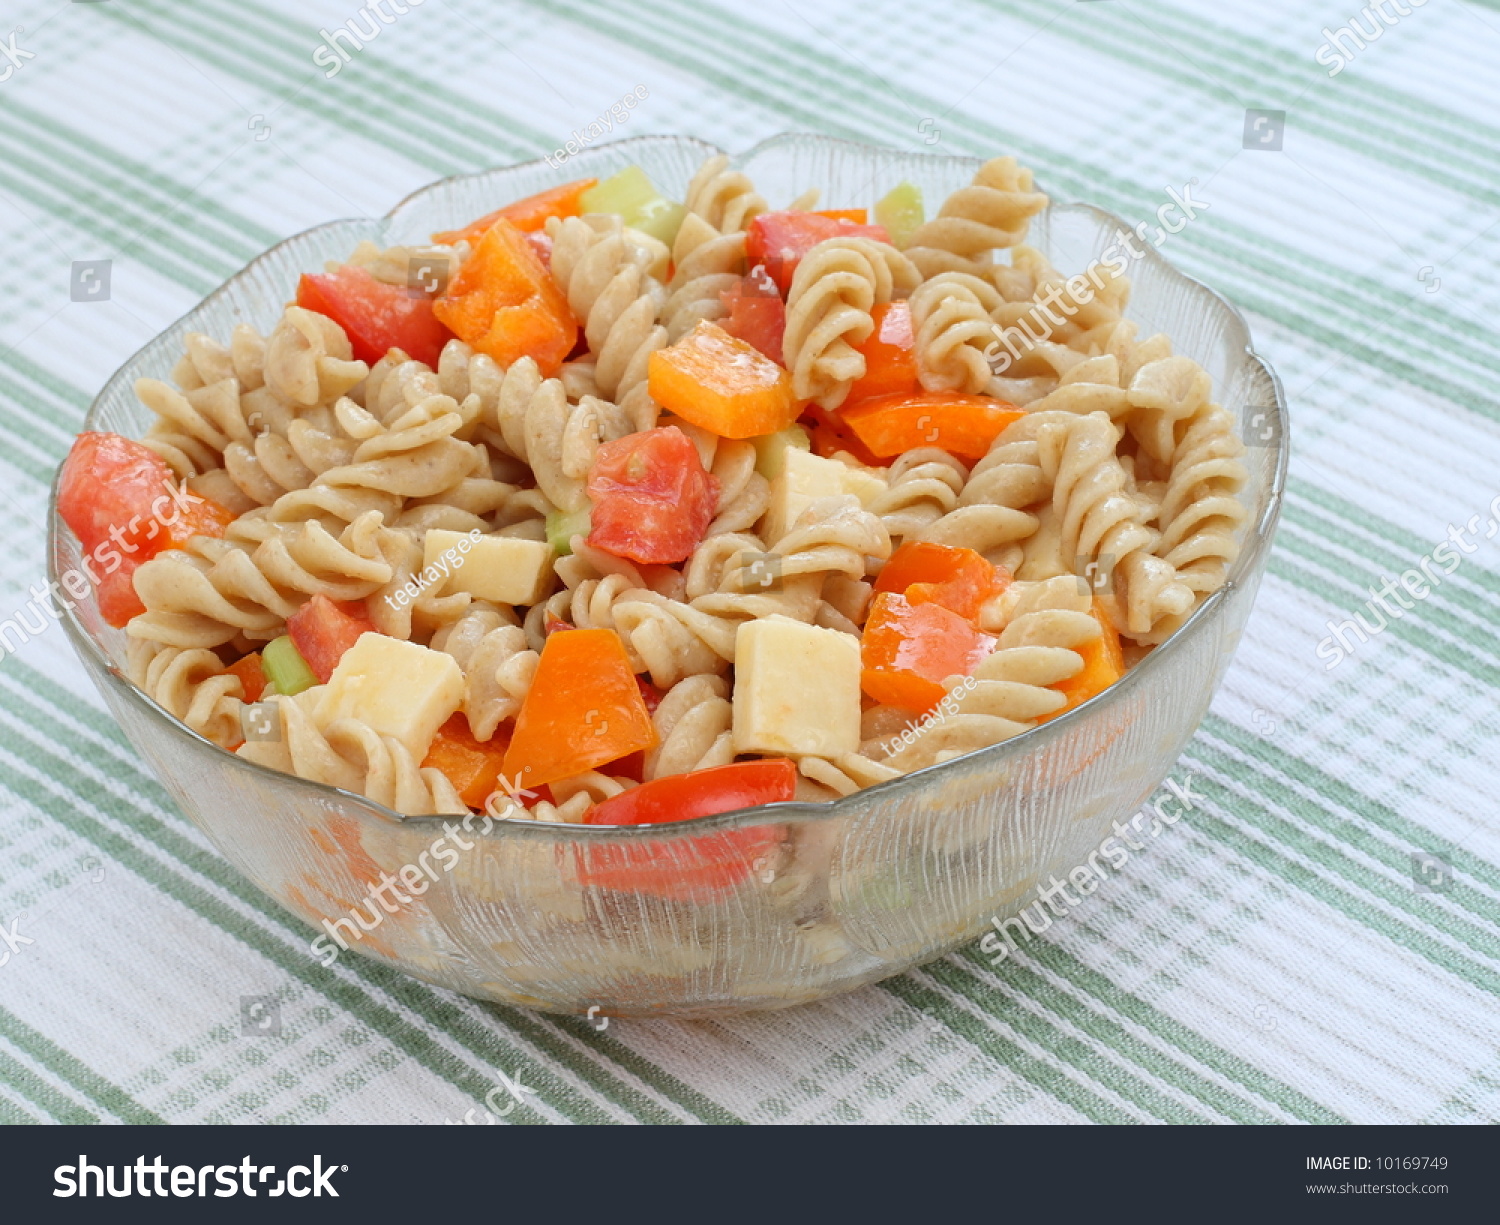 Colorful Pasta Salad Made With Spiral Multigrain Pasta, Fresh ...